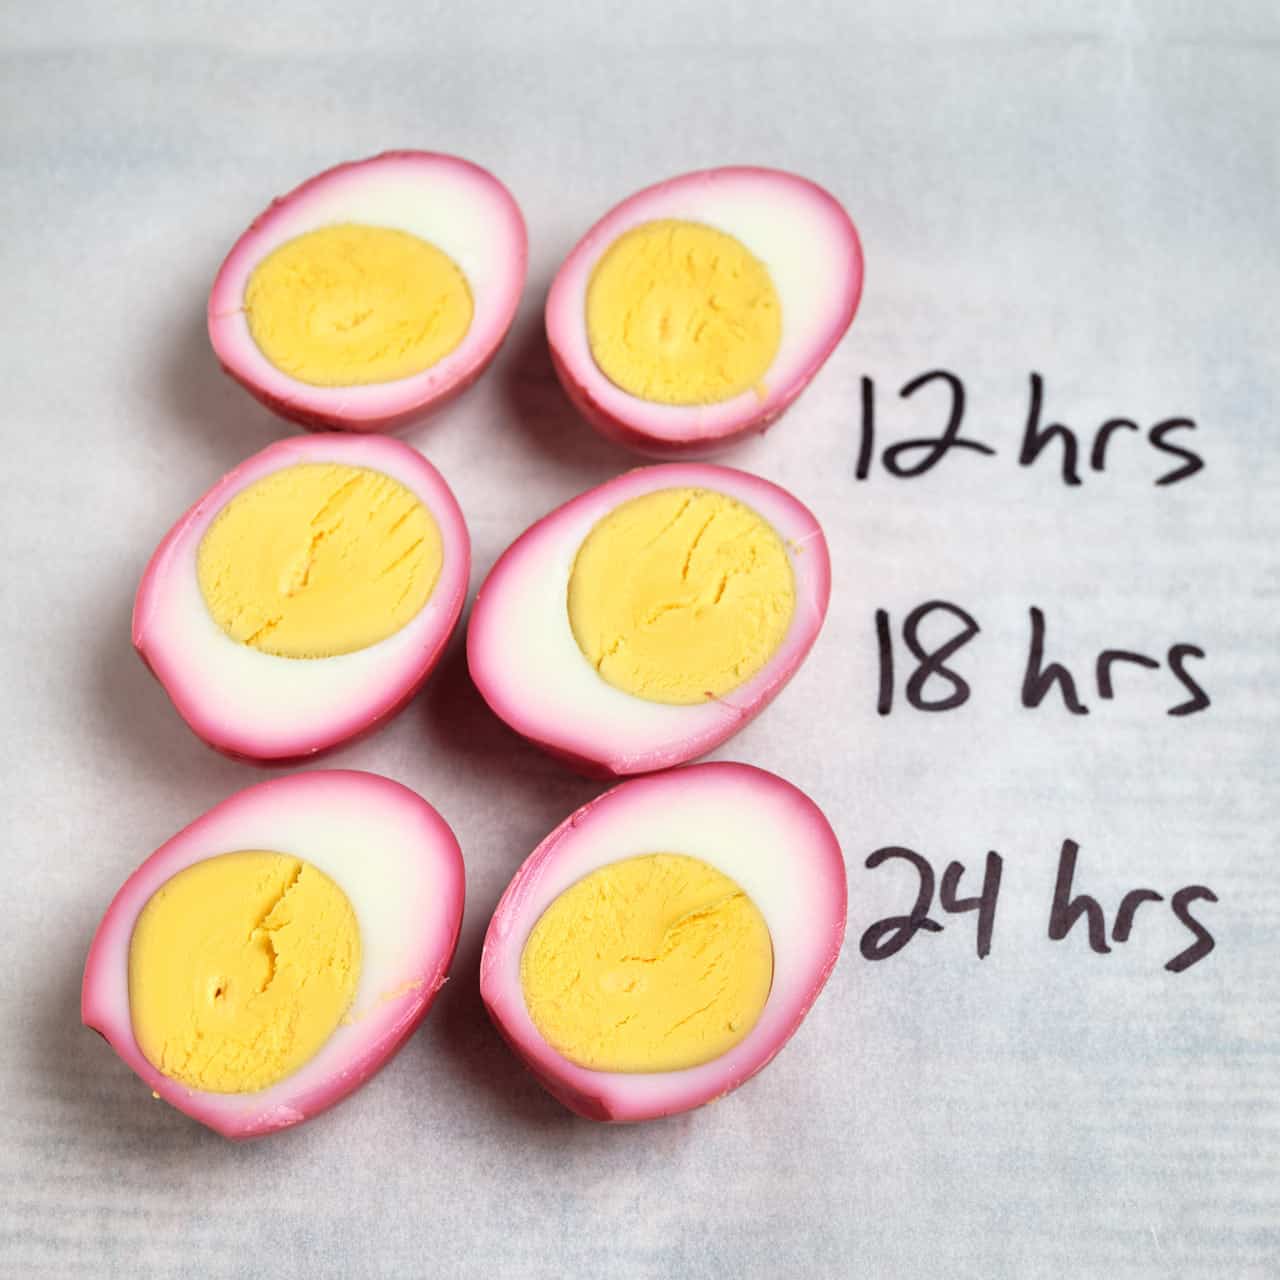 Hard boiled eggs soaked for 12, 18, and 24 hours in pickled beet brine, then cut in half